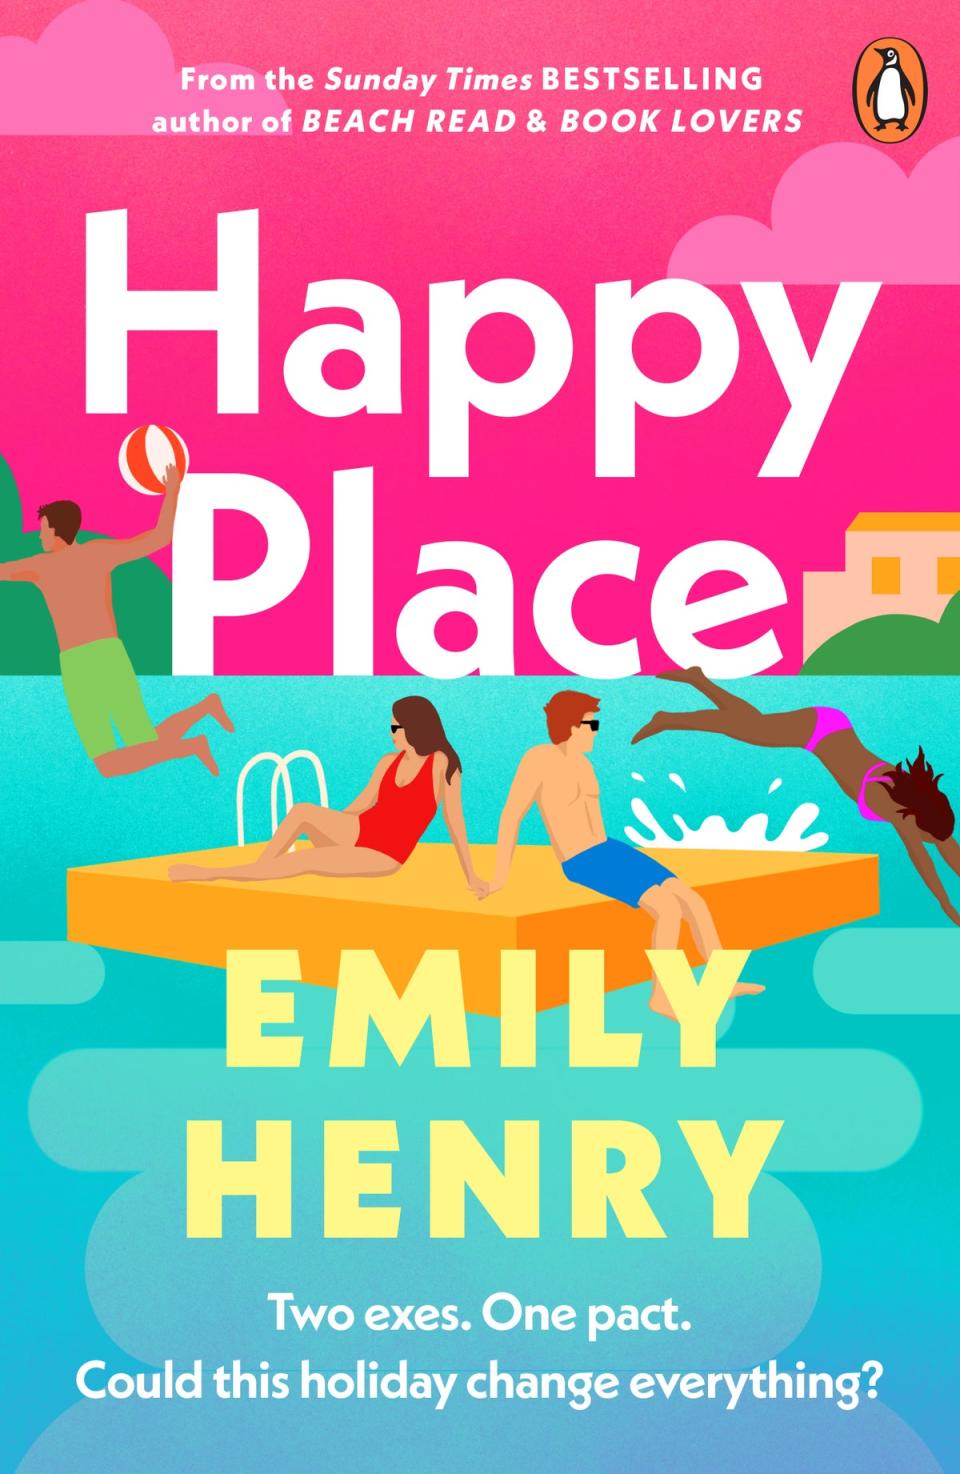 Happy Place is a ‘fake relationship’ romp between a junior doctor and a carpenter she’s pretending to date (Penguin)